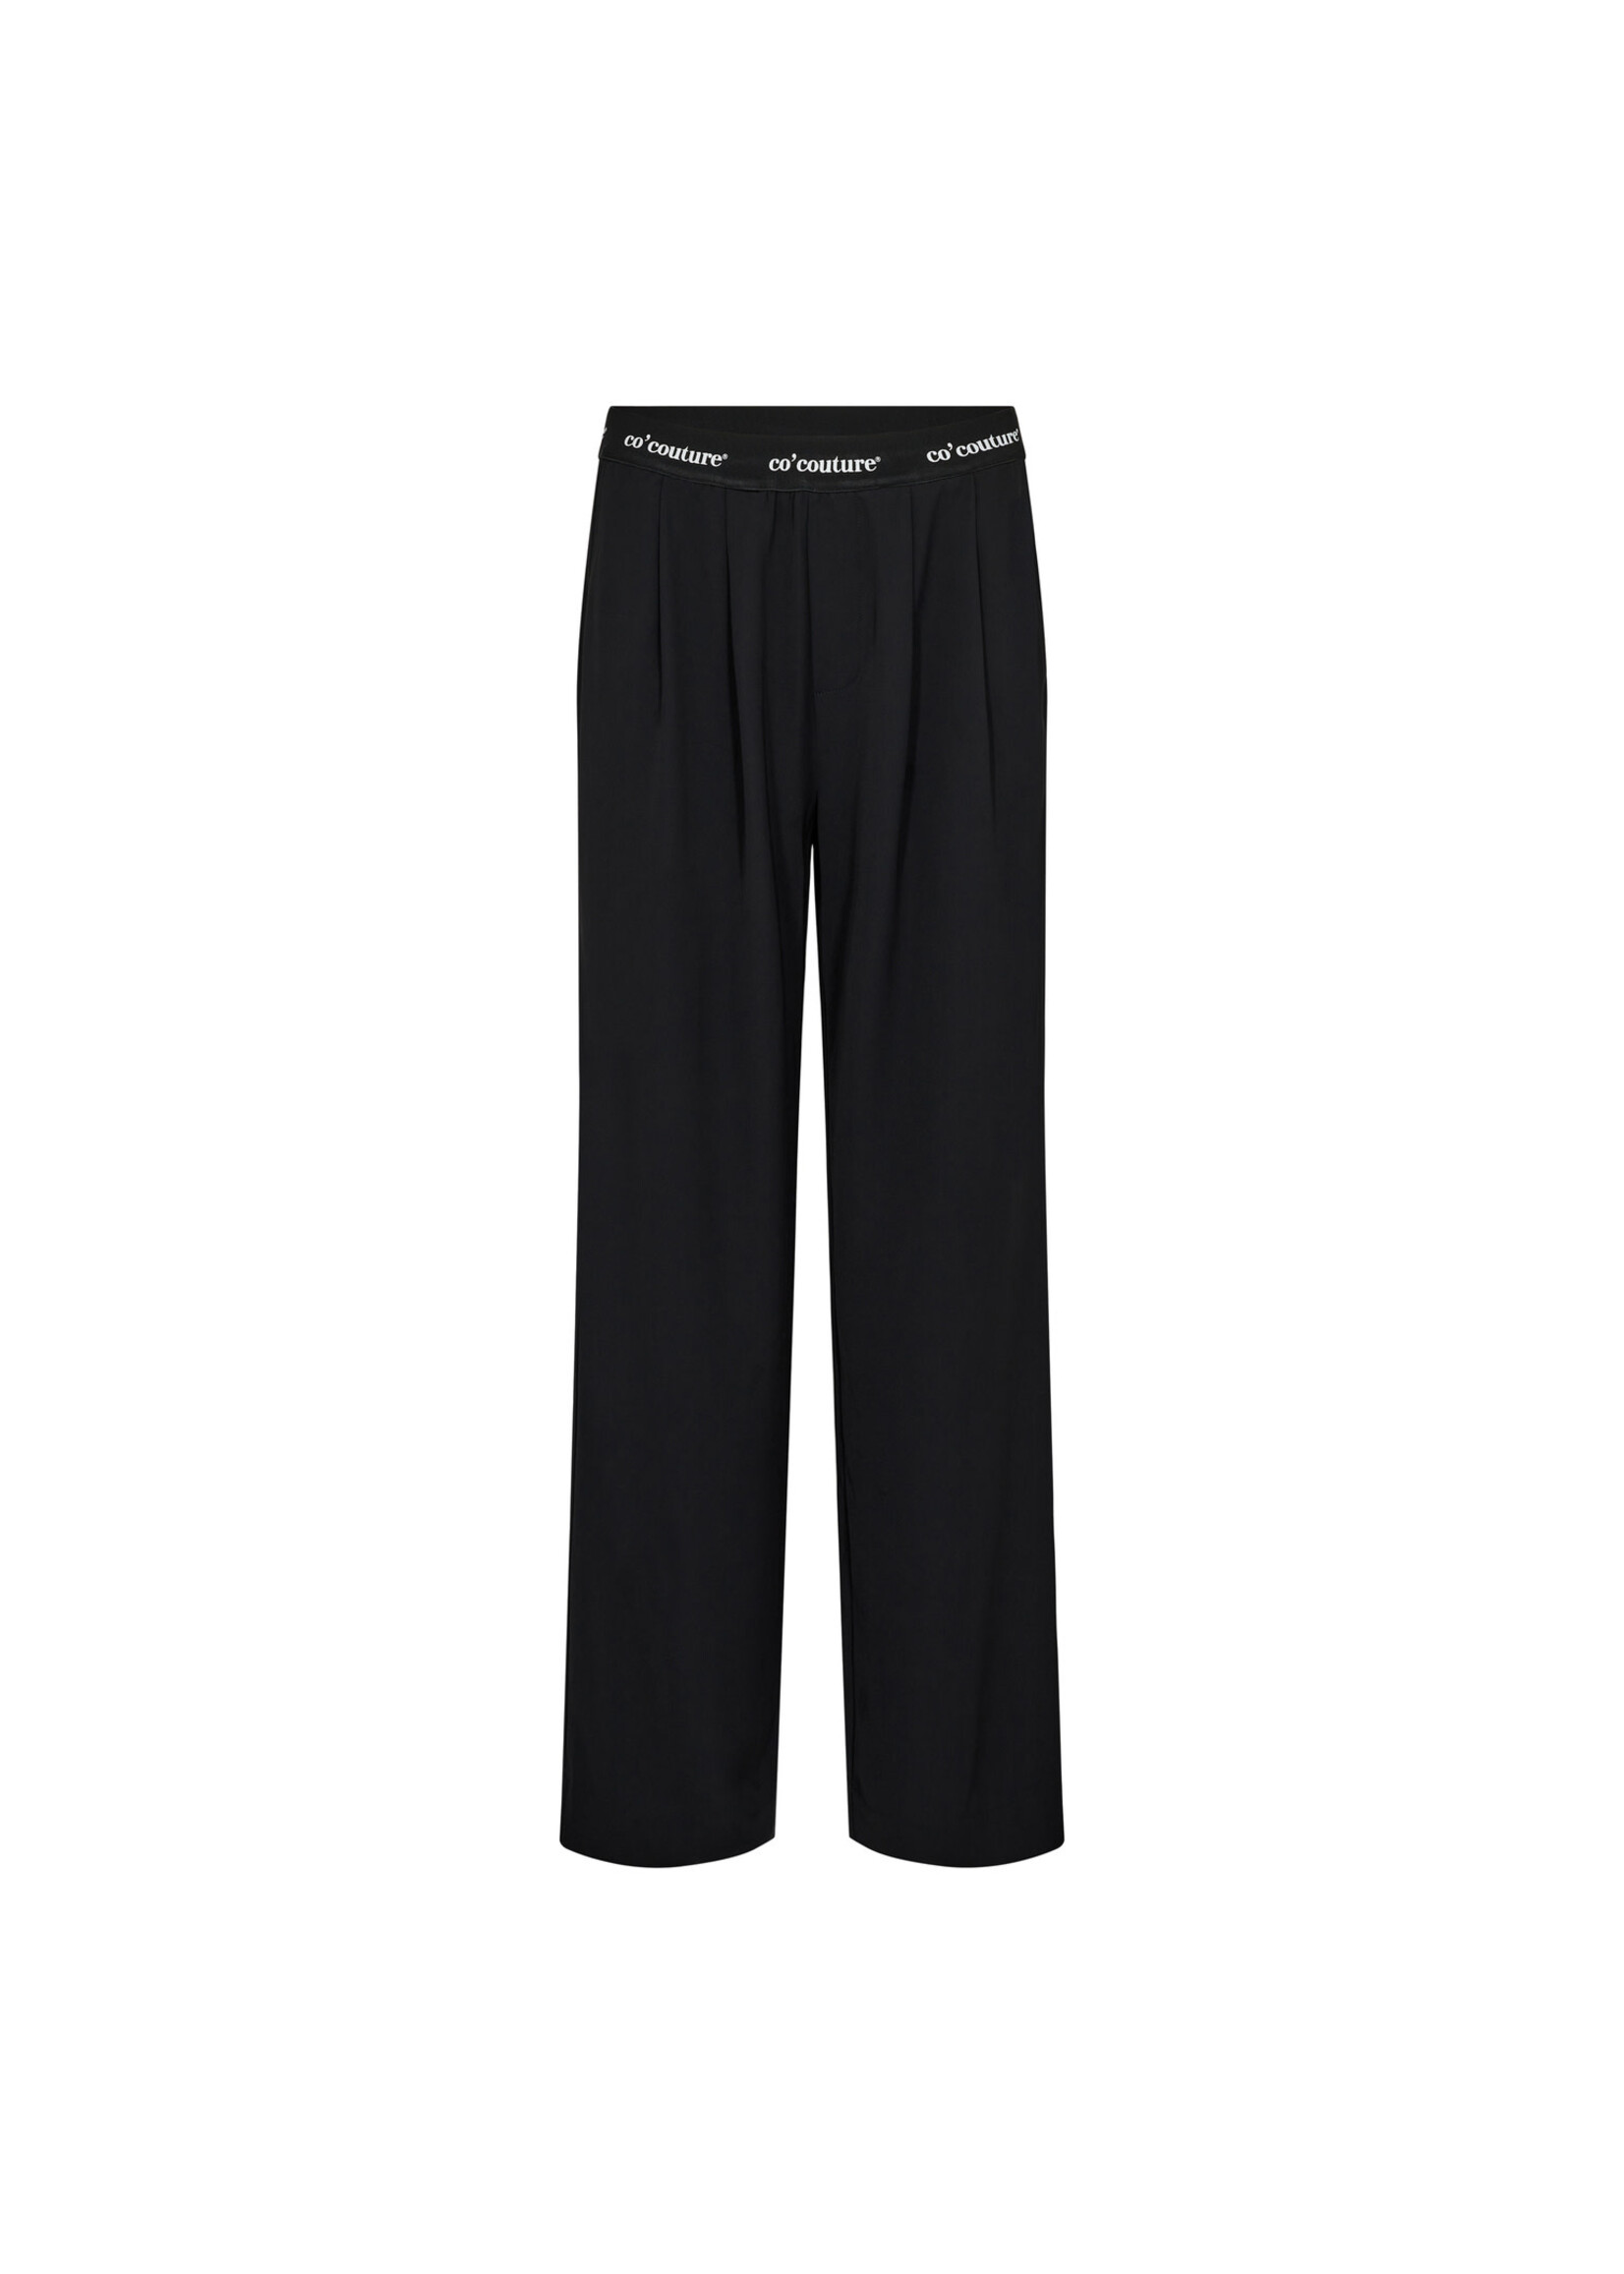 Co Couture Co Couture, AminaCC Logo Long Pant, Black, Size: